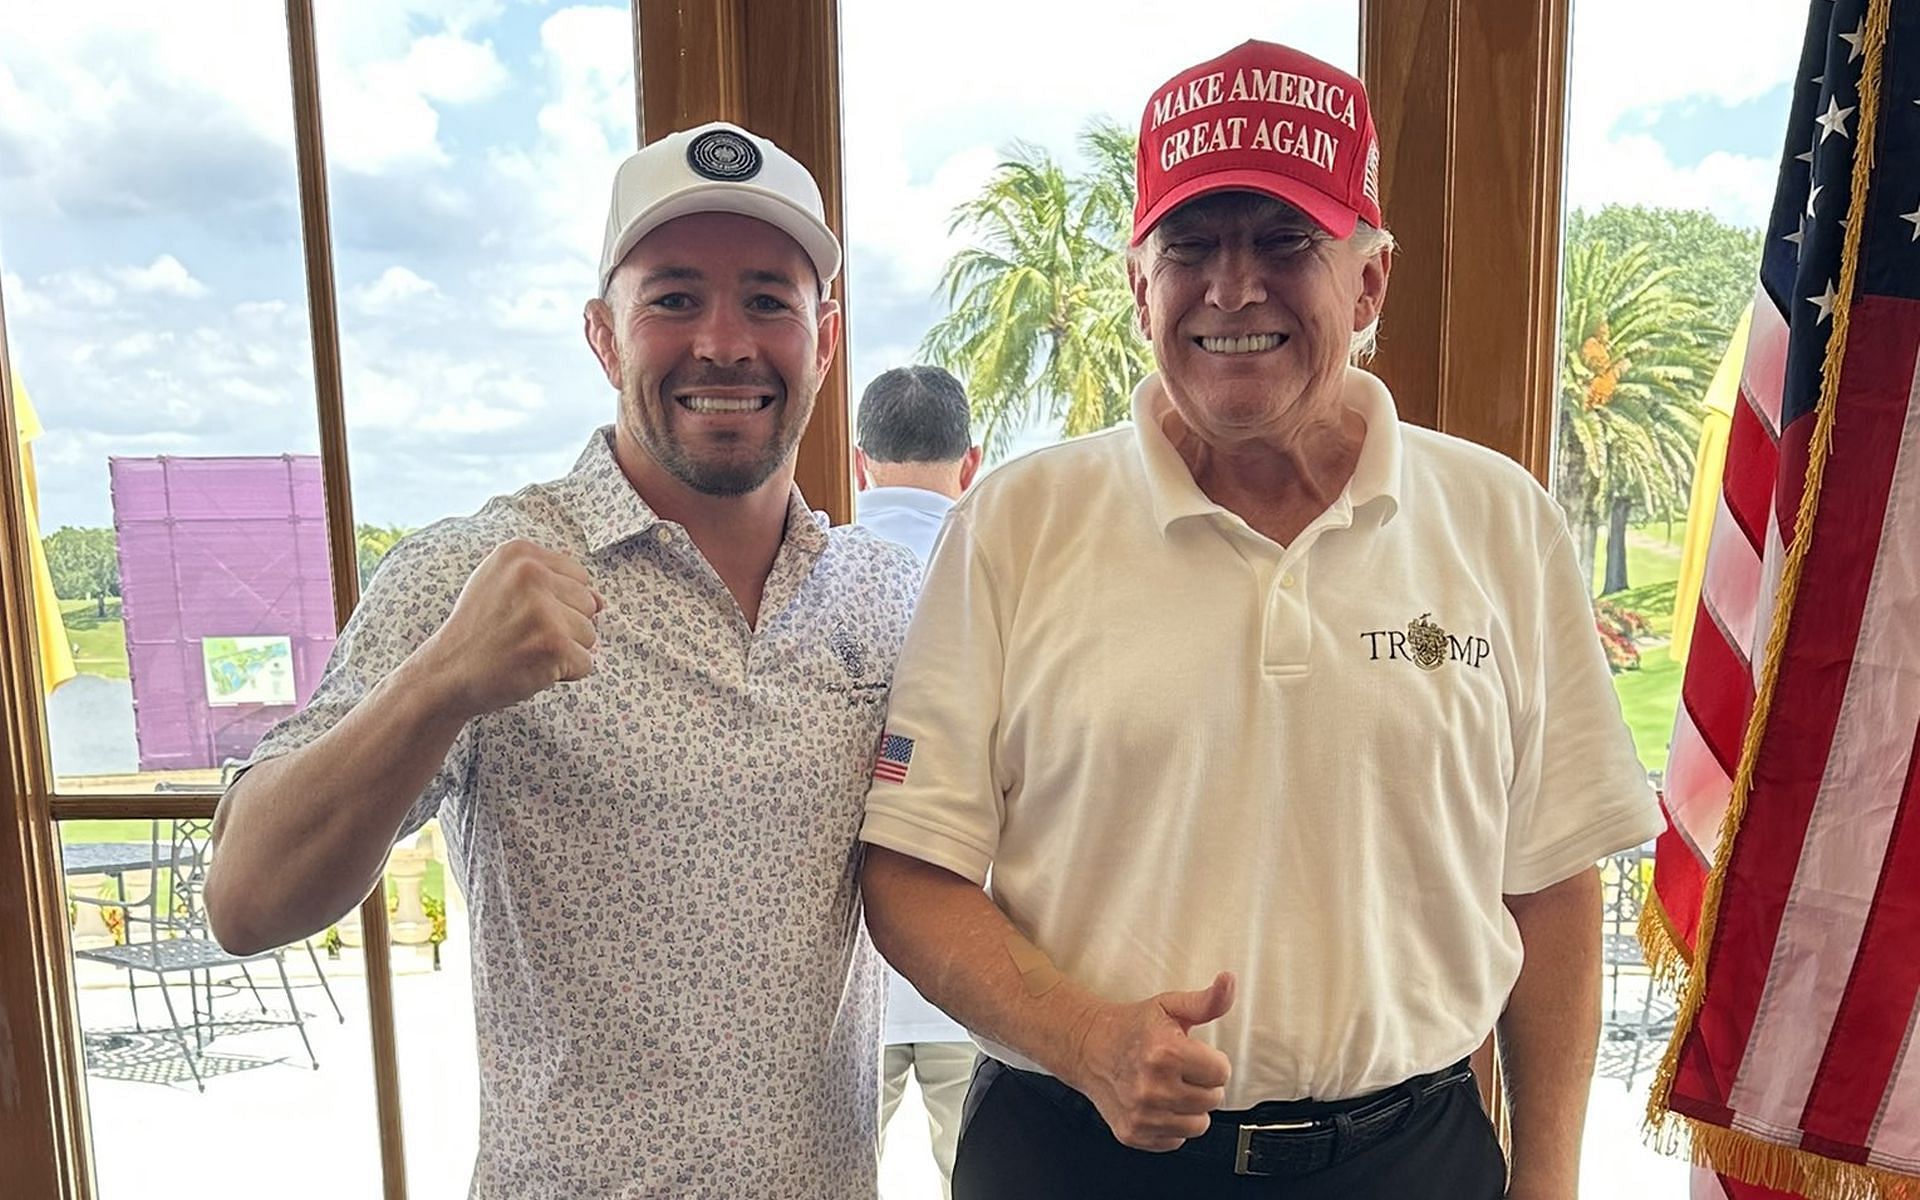 Colby Covington [L] with Donald Trump [R] [Image via @ColbyCovMMA Twitter]